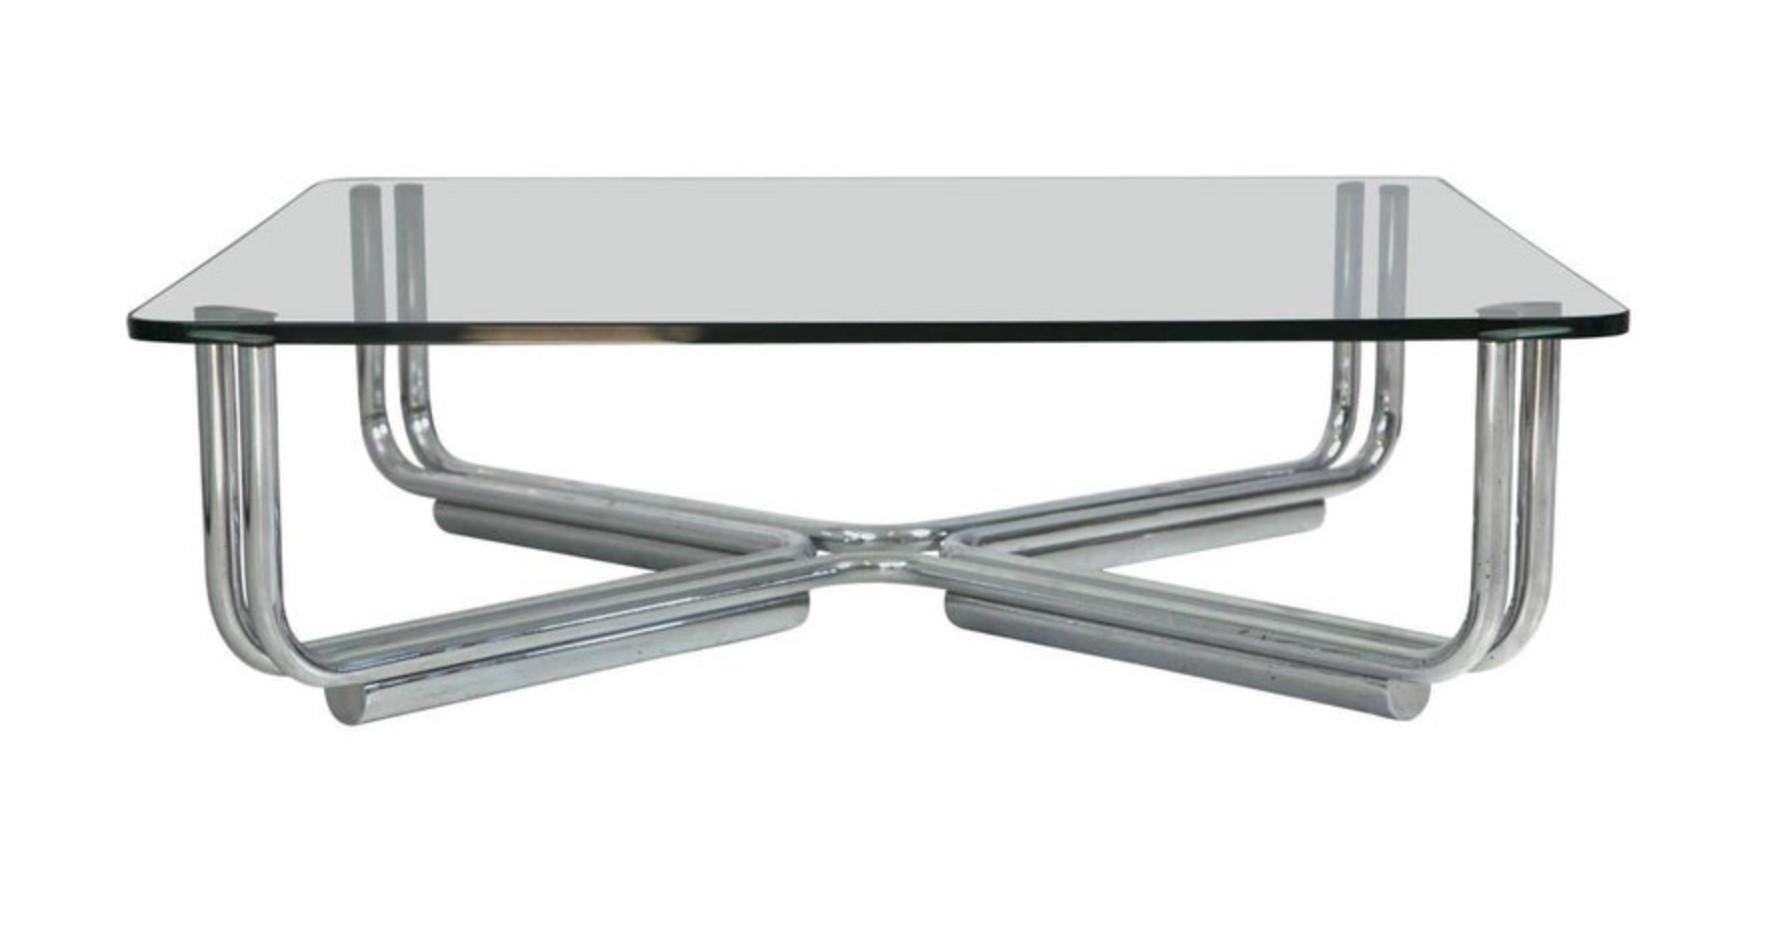 Elegant tubular chrome coffee table with original glass top. Model 784 Cassina. Designed by Gianfranco Frattini. Manufactured by Cassina. Low-slung, Mid-Century Italian Design, feels contemporary and eqasily fits in any bespoke home or office.